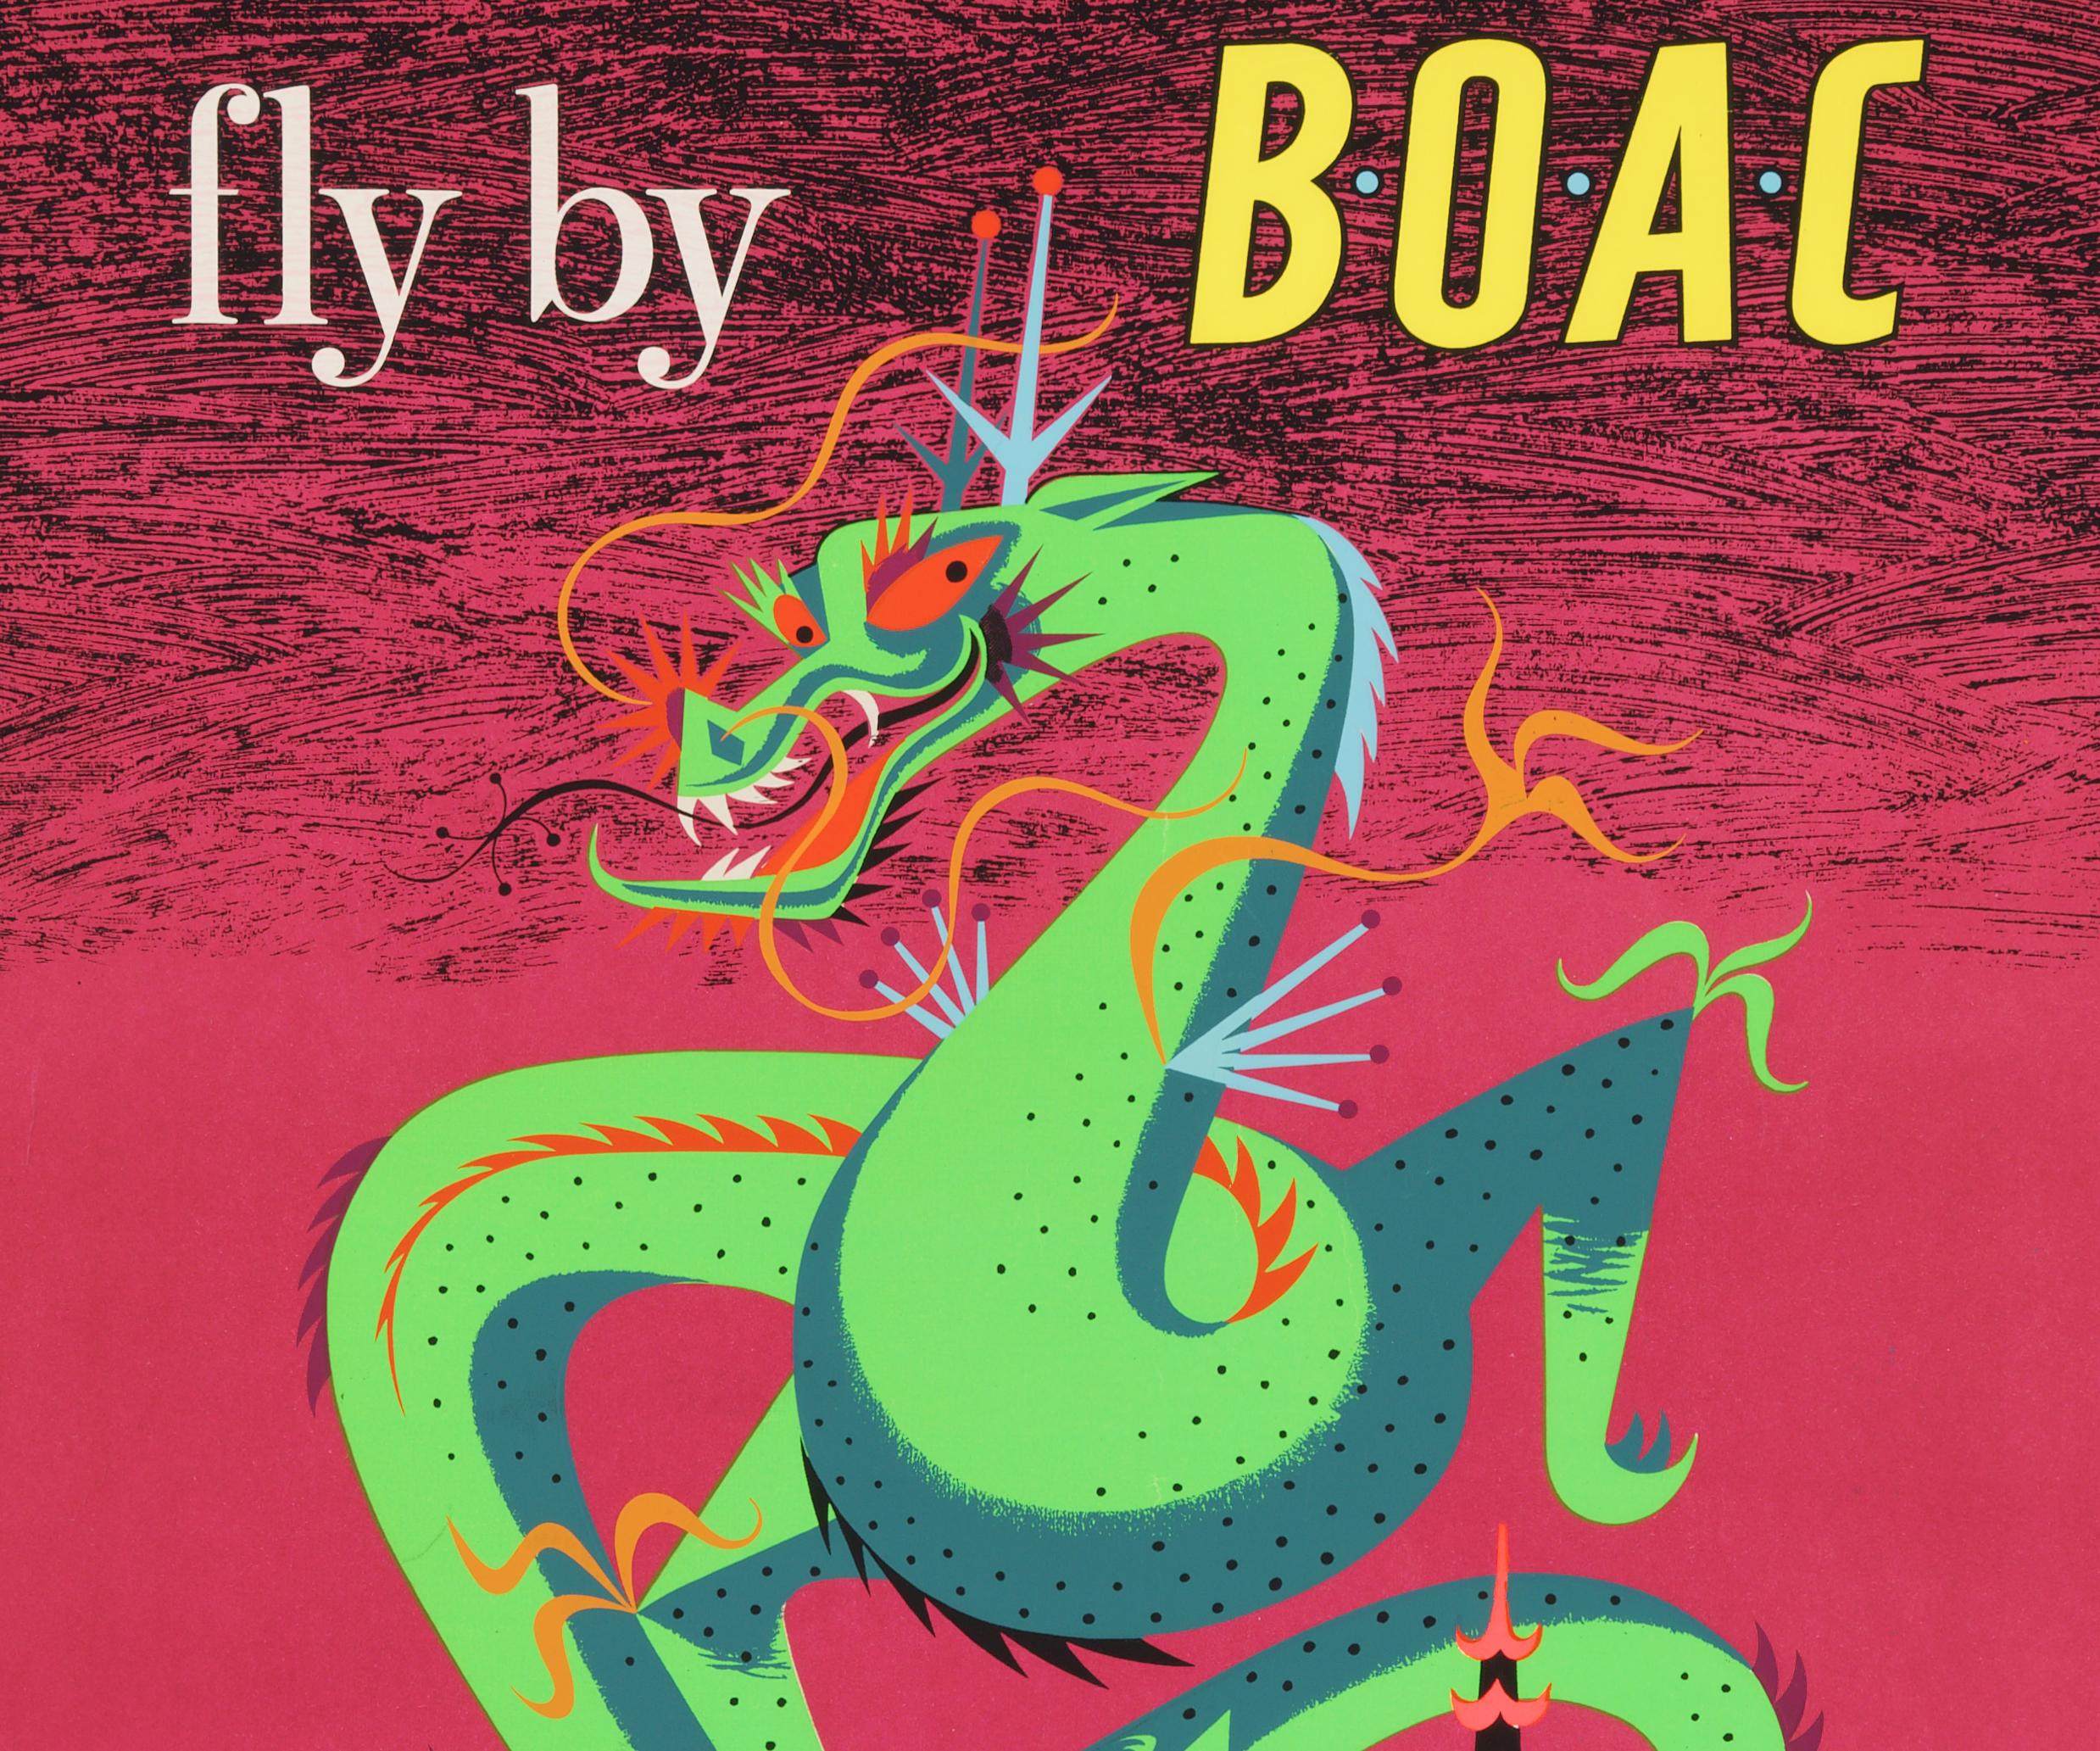 Original Vintage British Airline Poster – Fly by BOAC to the Far East - Print by Maurice Laban